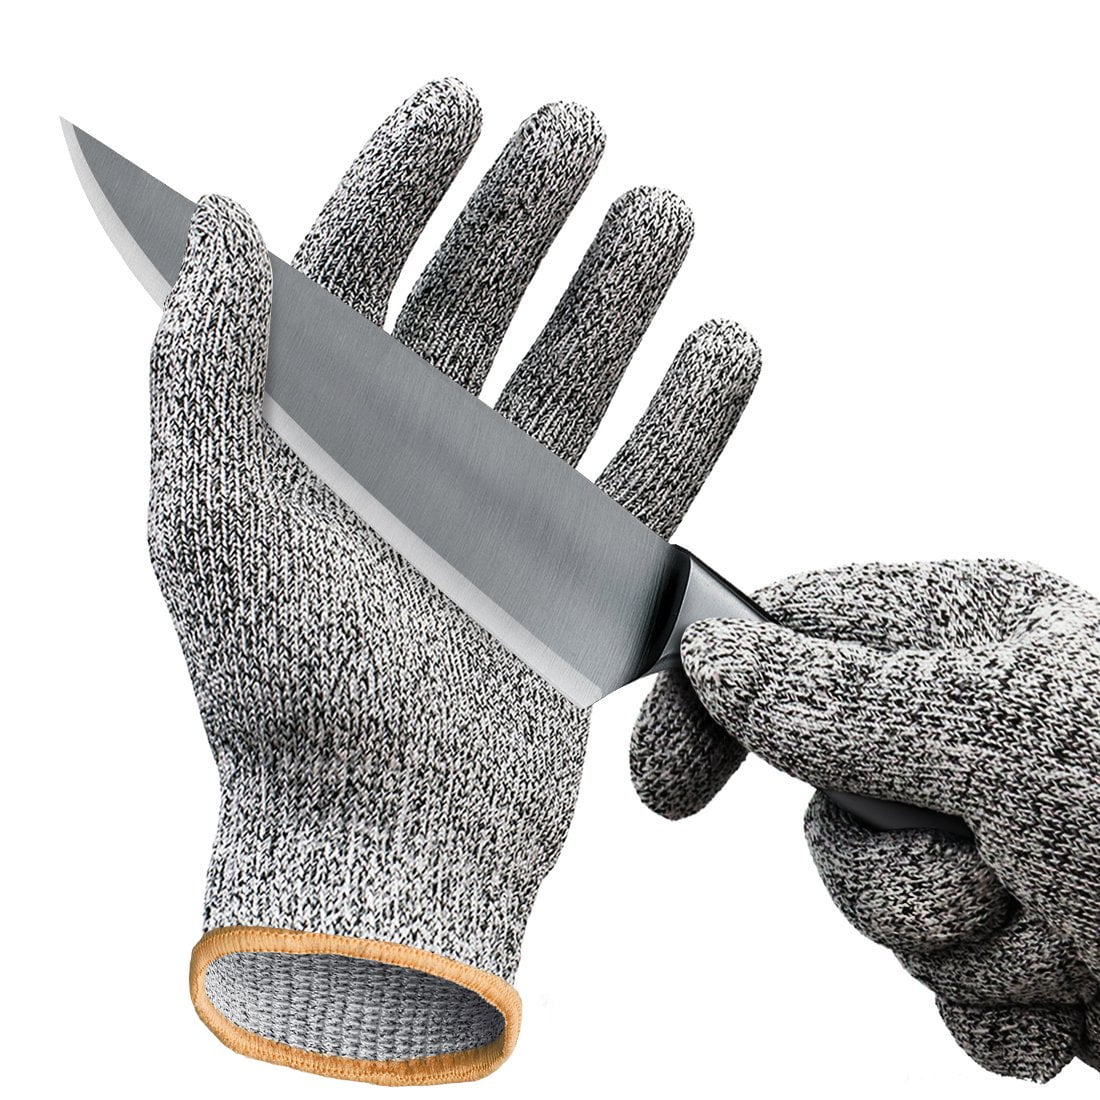 Cut Resistant Gloves / Cutting Gloves - Cutting Gloves (Extra Large) for  Pumpkin Carving, Wood Carving, Meat Cutting and Oyster Shelling 